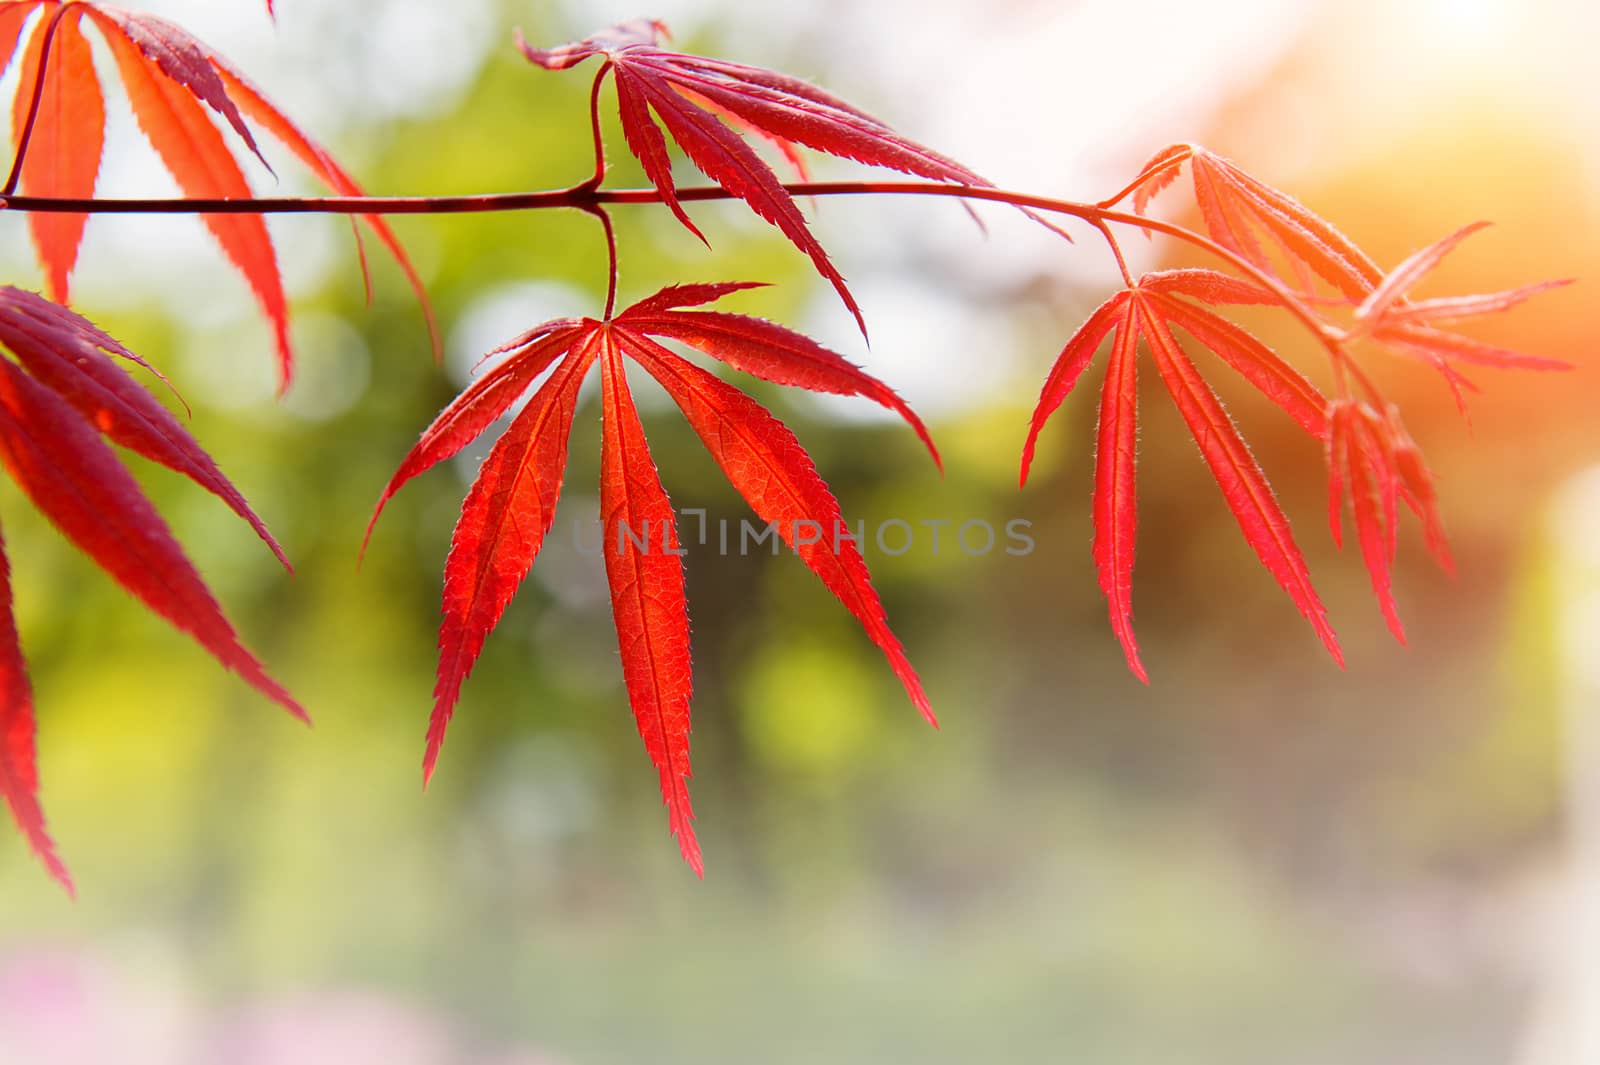 Maple in Autumn Season with soft focus. by gutarphotoghaphy